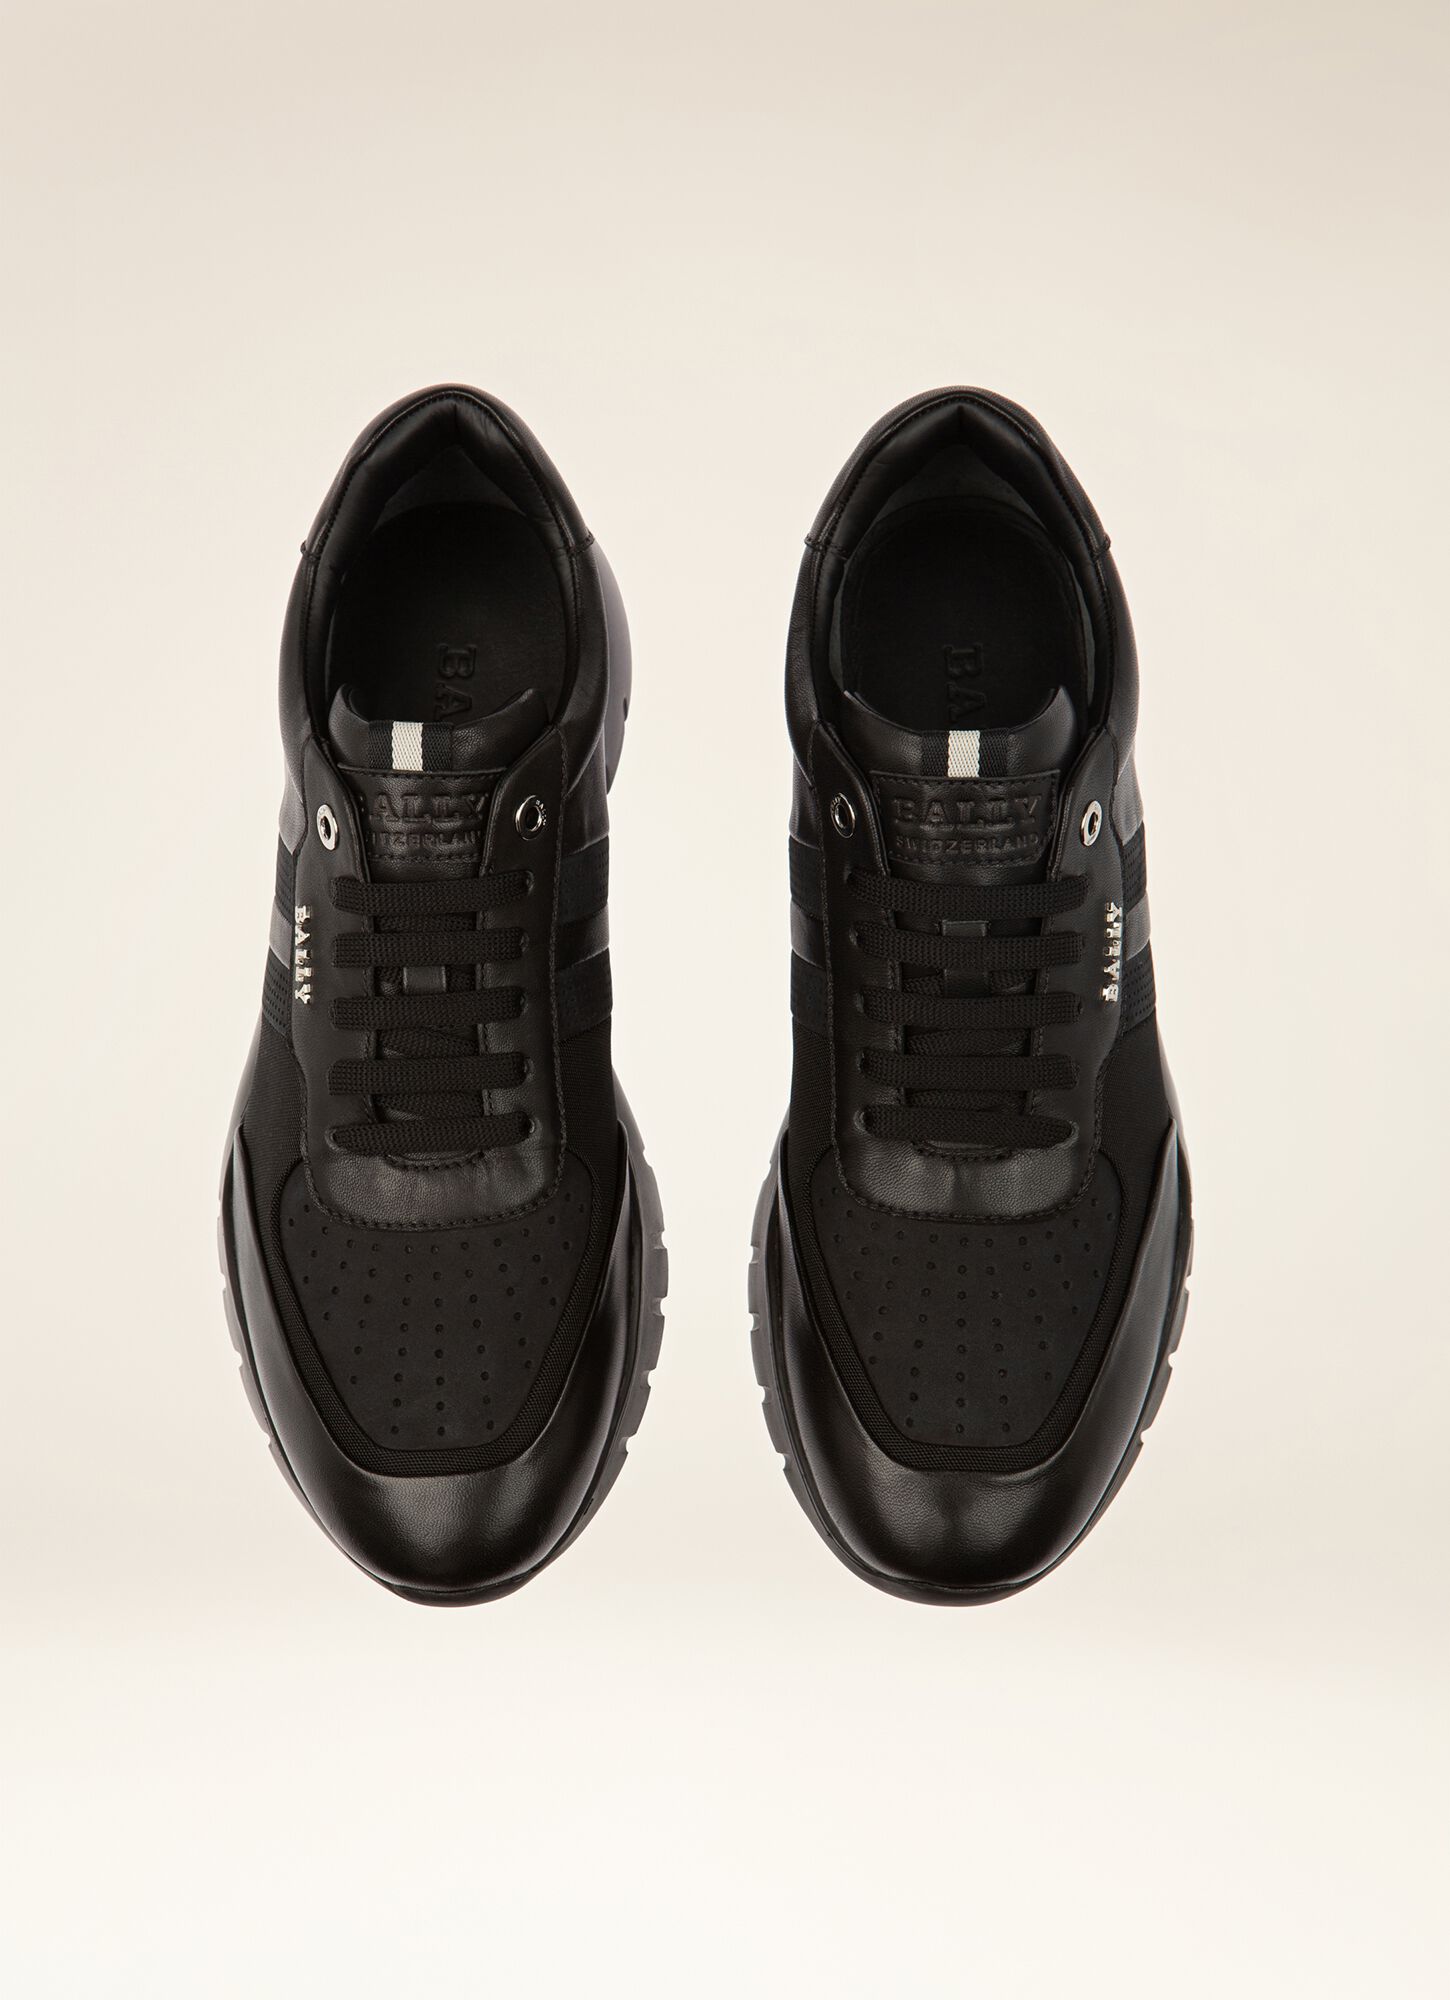 Bison| Mens Sneakers | Black Leather 